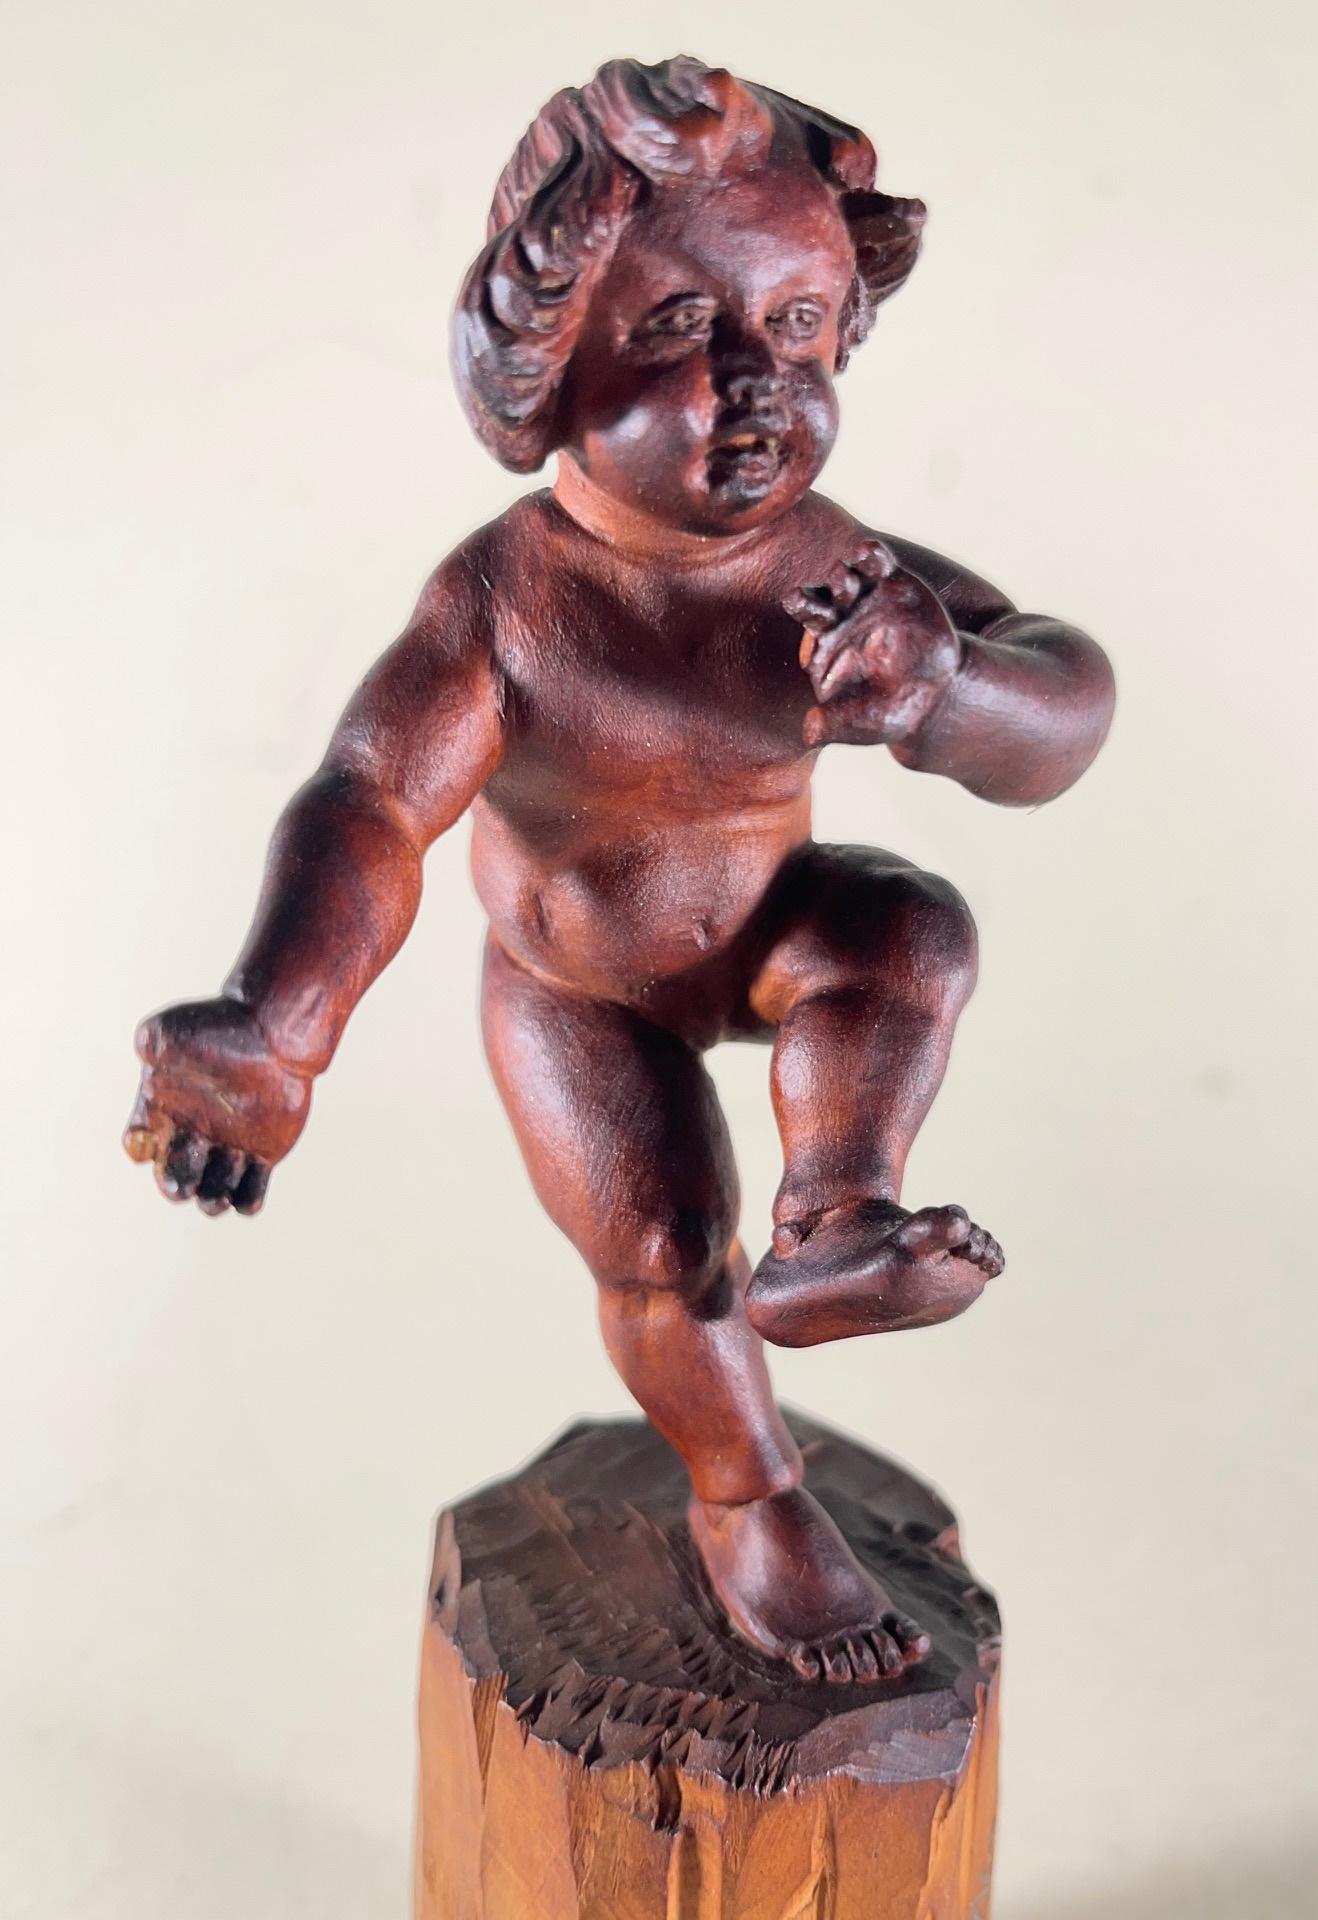 Vintage Bavarian wood carving of the infant bacchus

Oberammergau is a world-famous wood carver town in Bavaria, Germany. Nikolaus Lang, a known artist, created a small sculpture of a young Bacchus. The carving is masterfully done with perfect